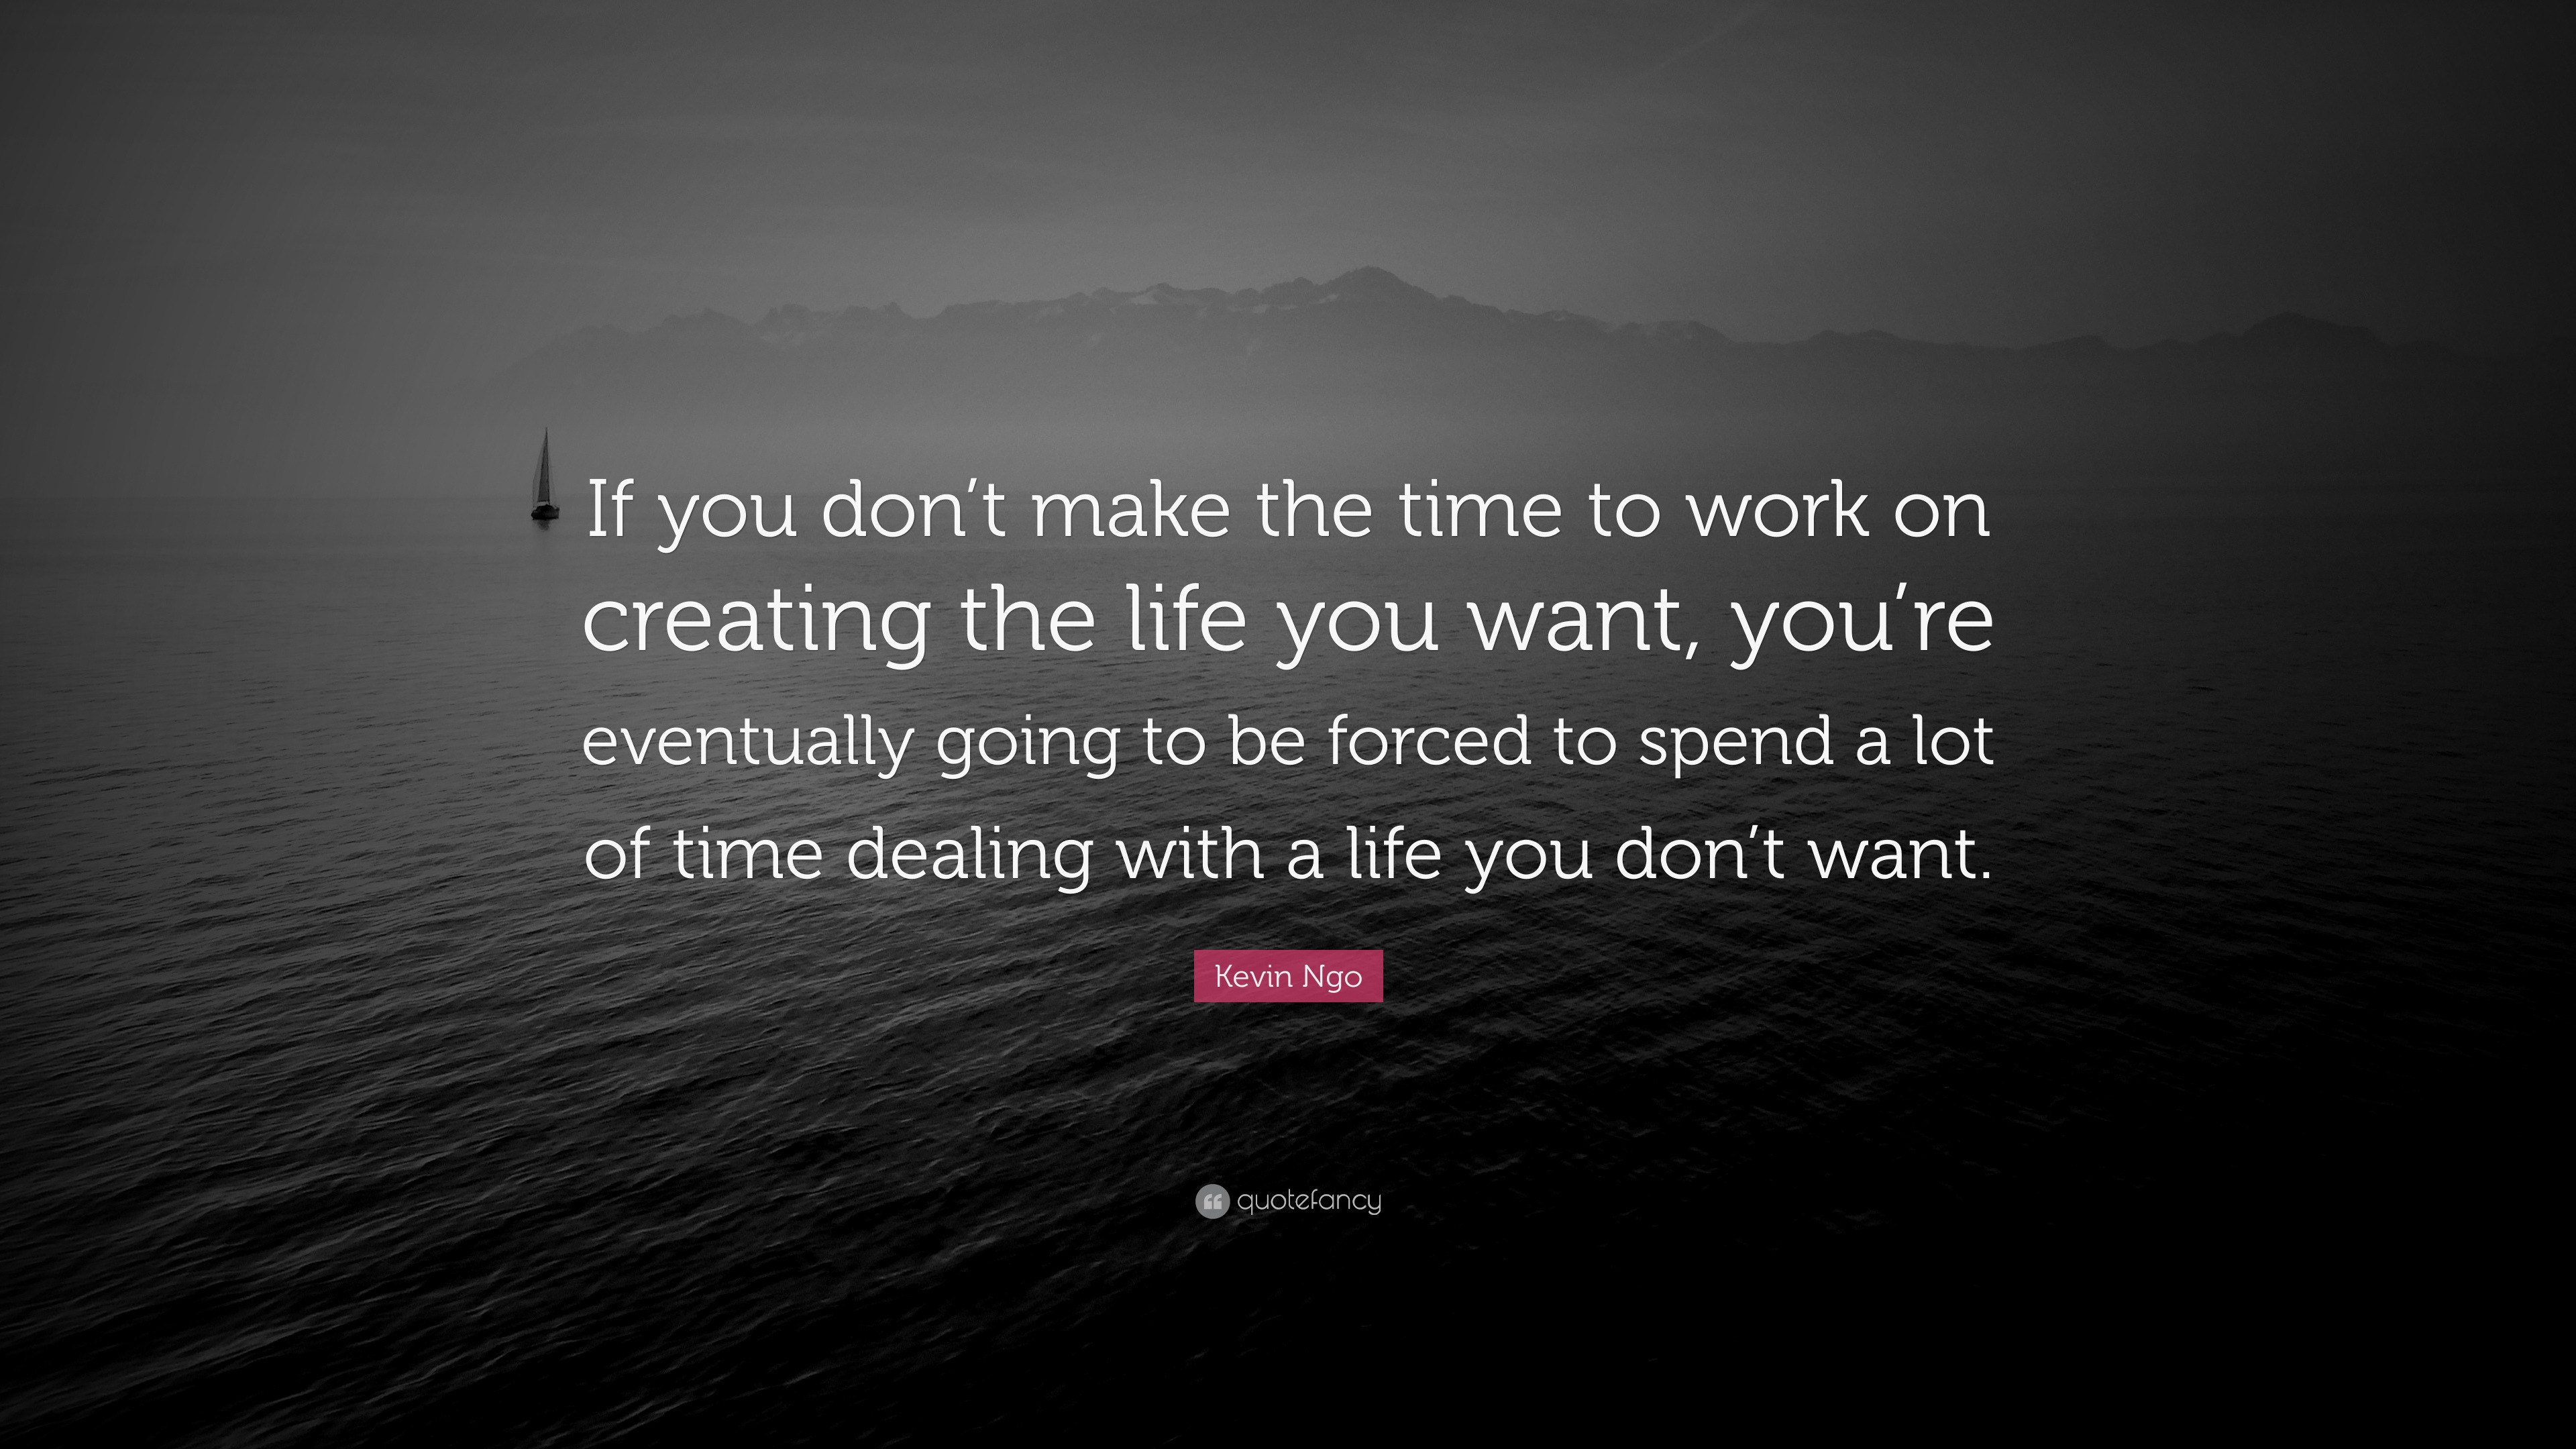 Kevin Ngo Quote: “If you don't make the time to work on creating the life  you want, you're eventually going to be forced to spend a lot of”